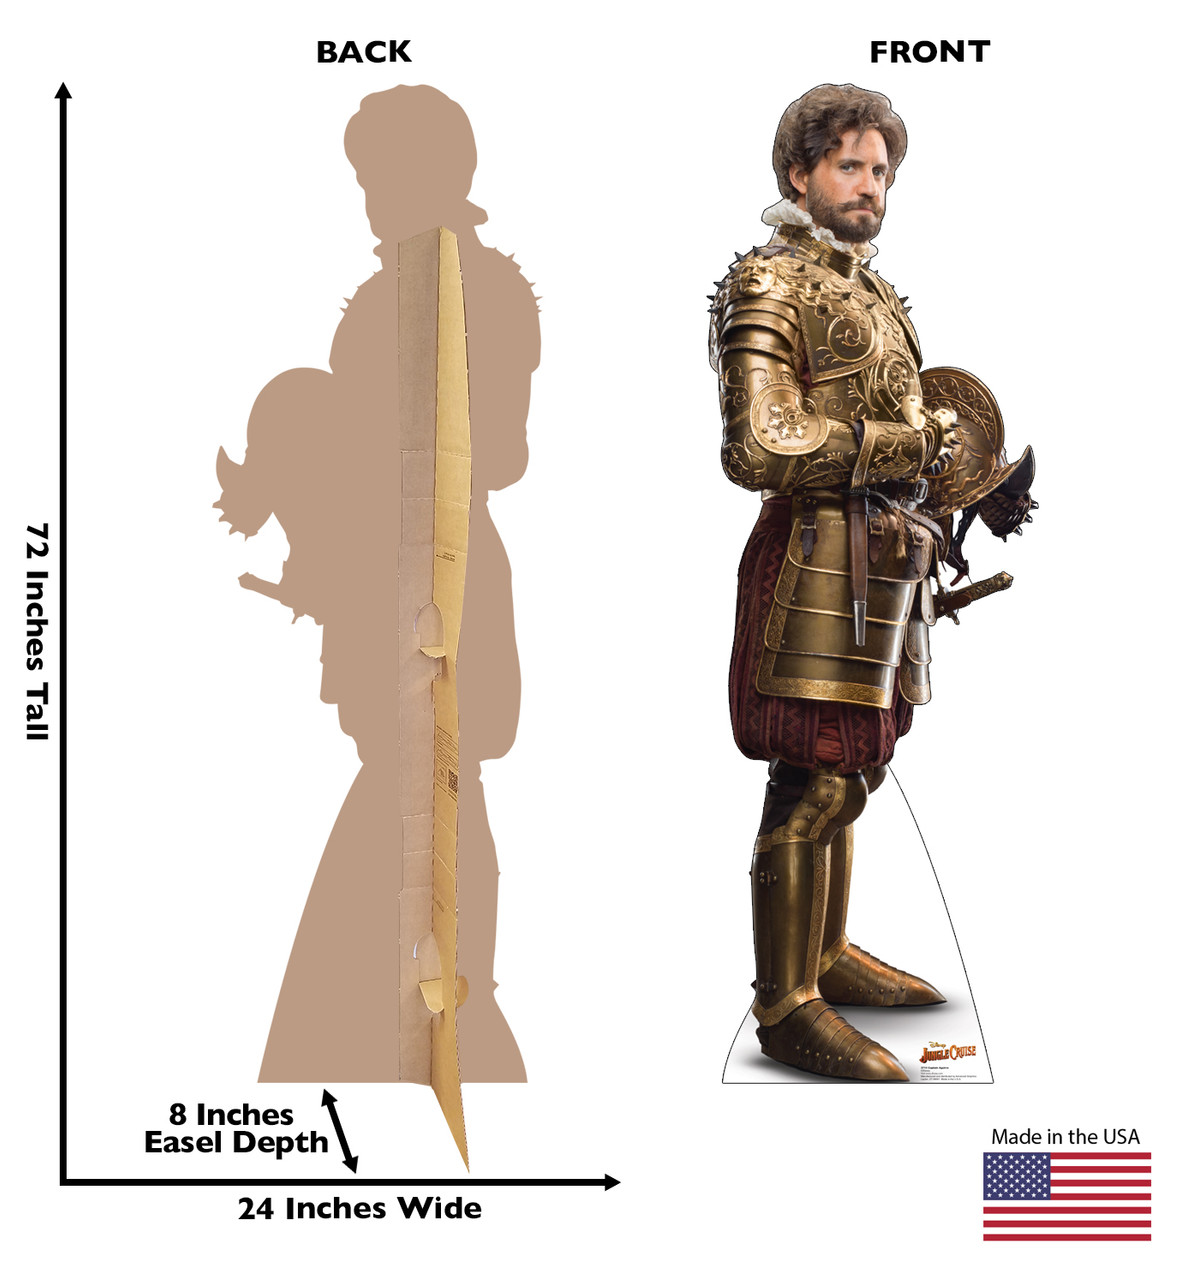 Life-size cardboard standee of Captain Aguirre from Jungle Cruise with back and front dimensions.